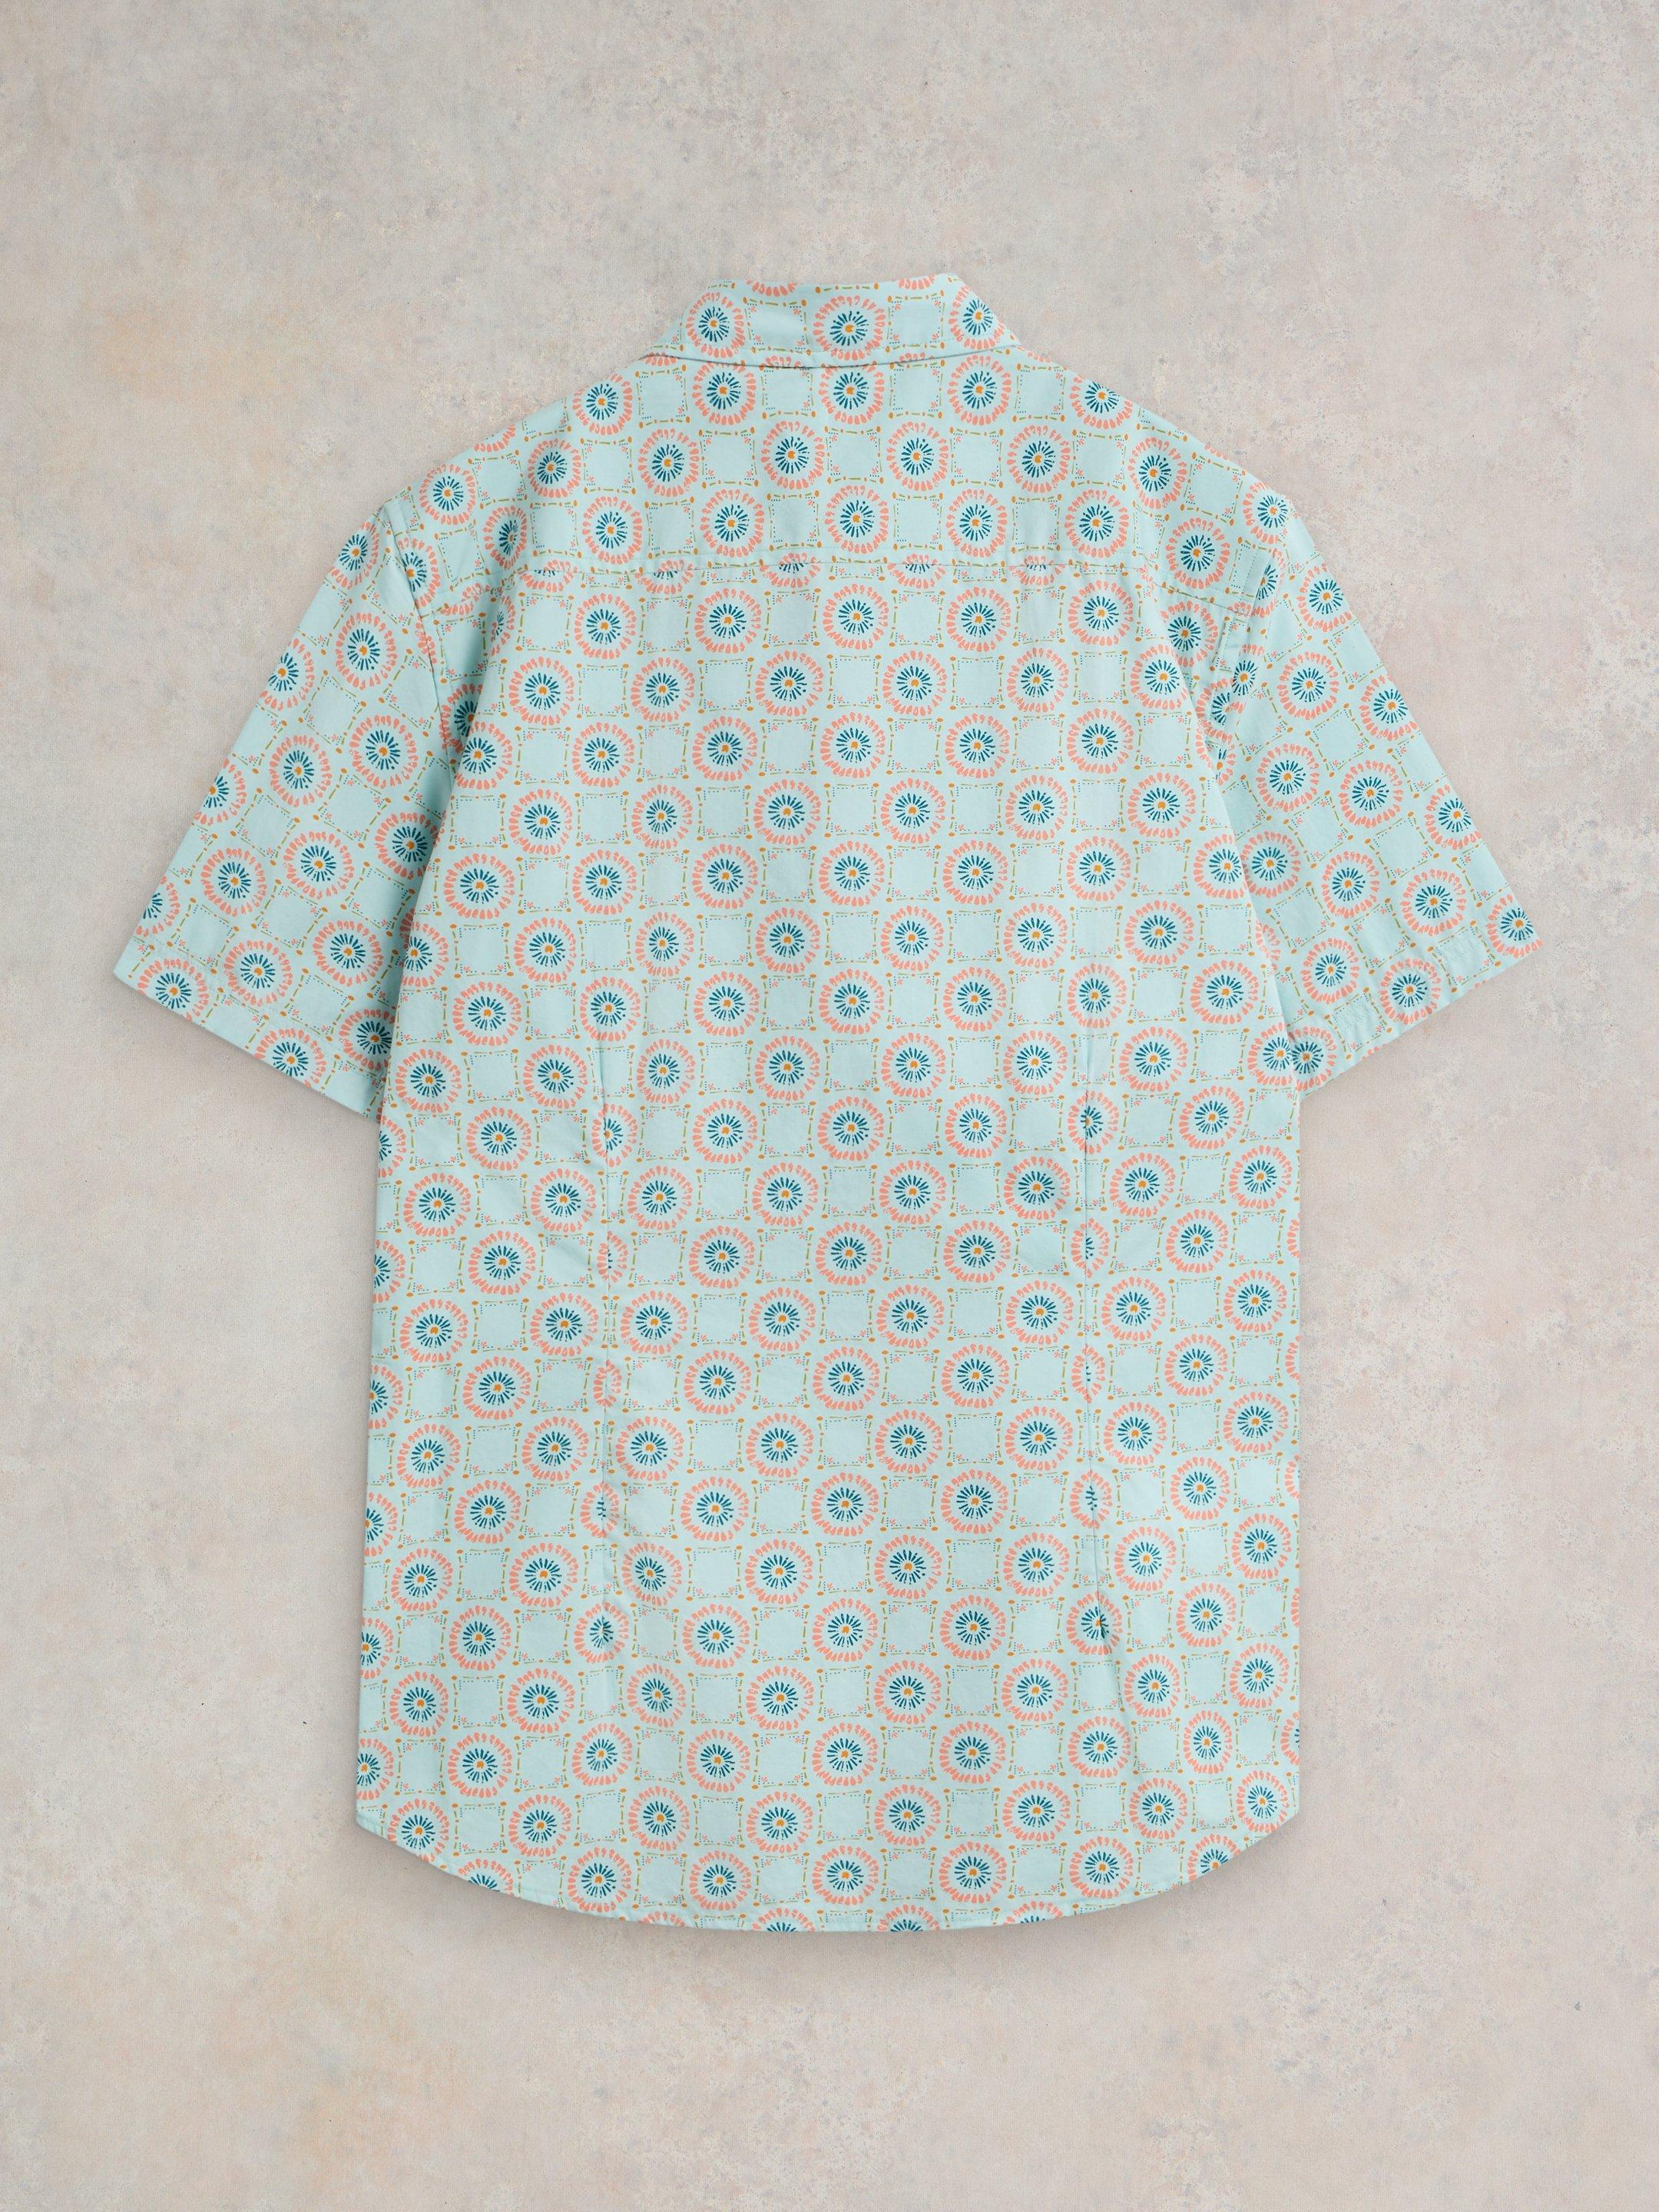 Daisy Tile Printed SS Shirt in BLUE PR - FLAT BACK